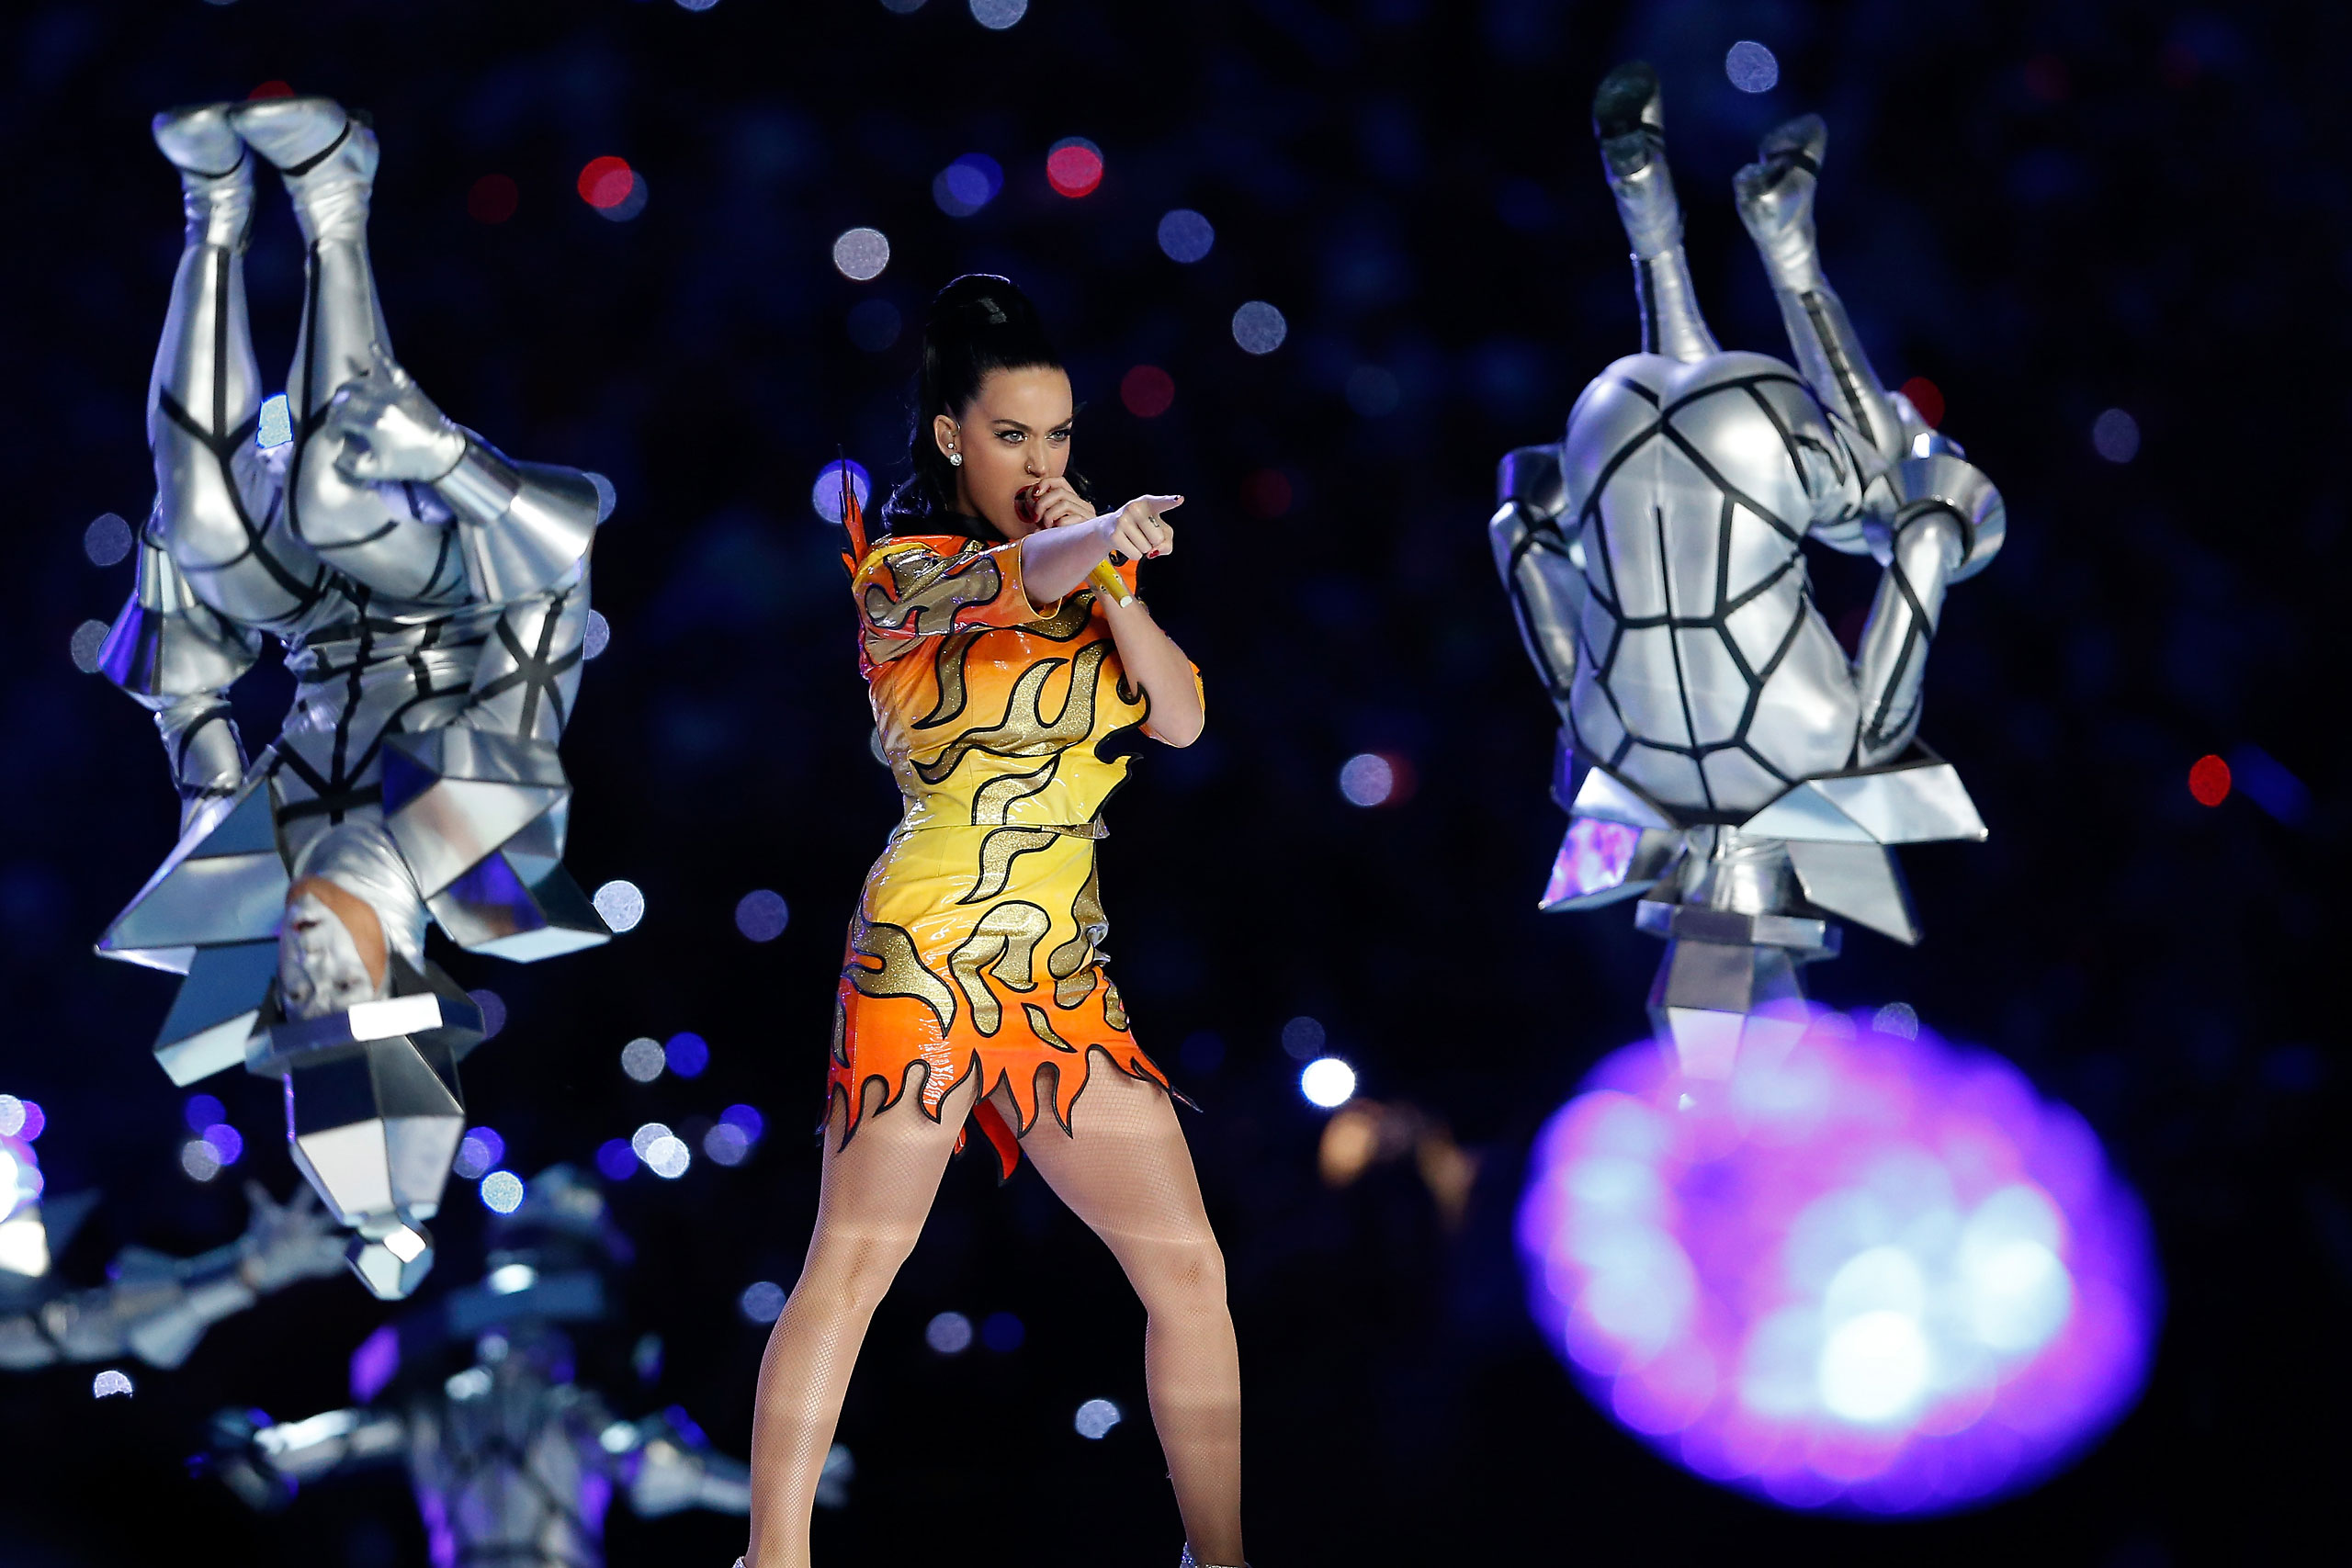 Katy Perry performs during the Pepsi Super Bowl XLIX Halftime Show at University of Phoenix Stadium on Feb. 1, 2015 in Glendale, Ariz.